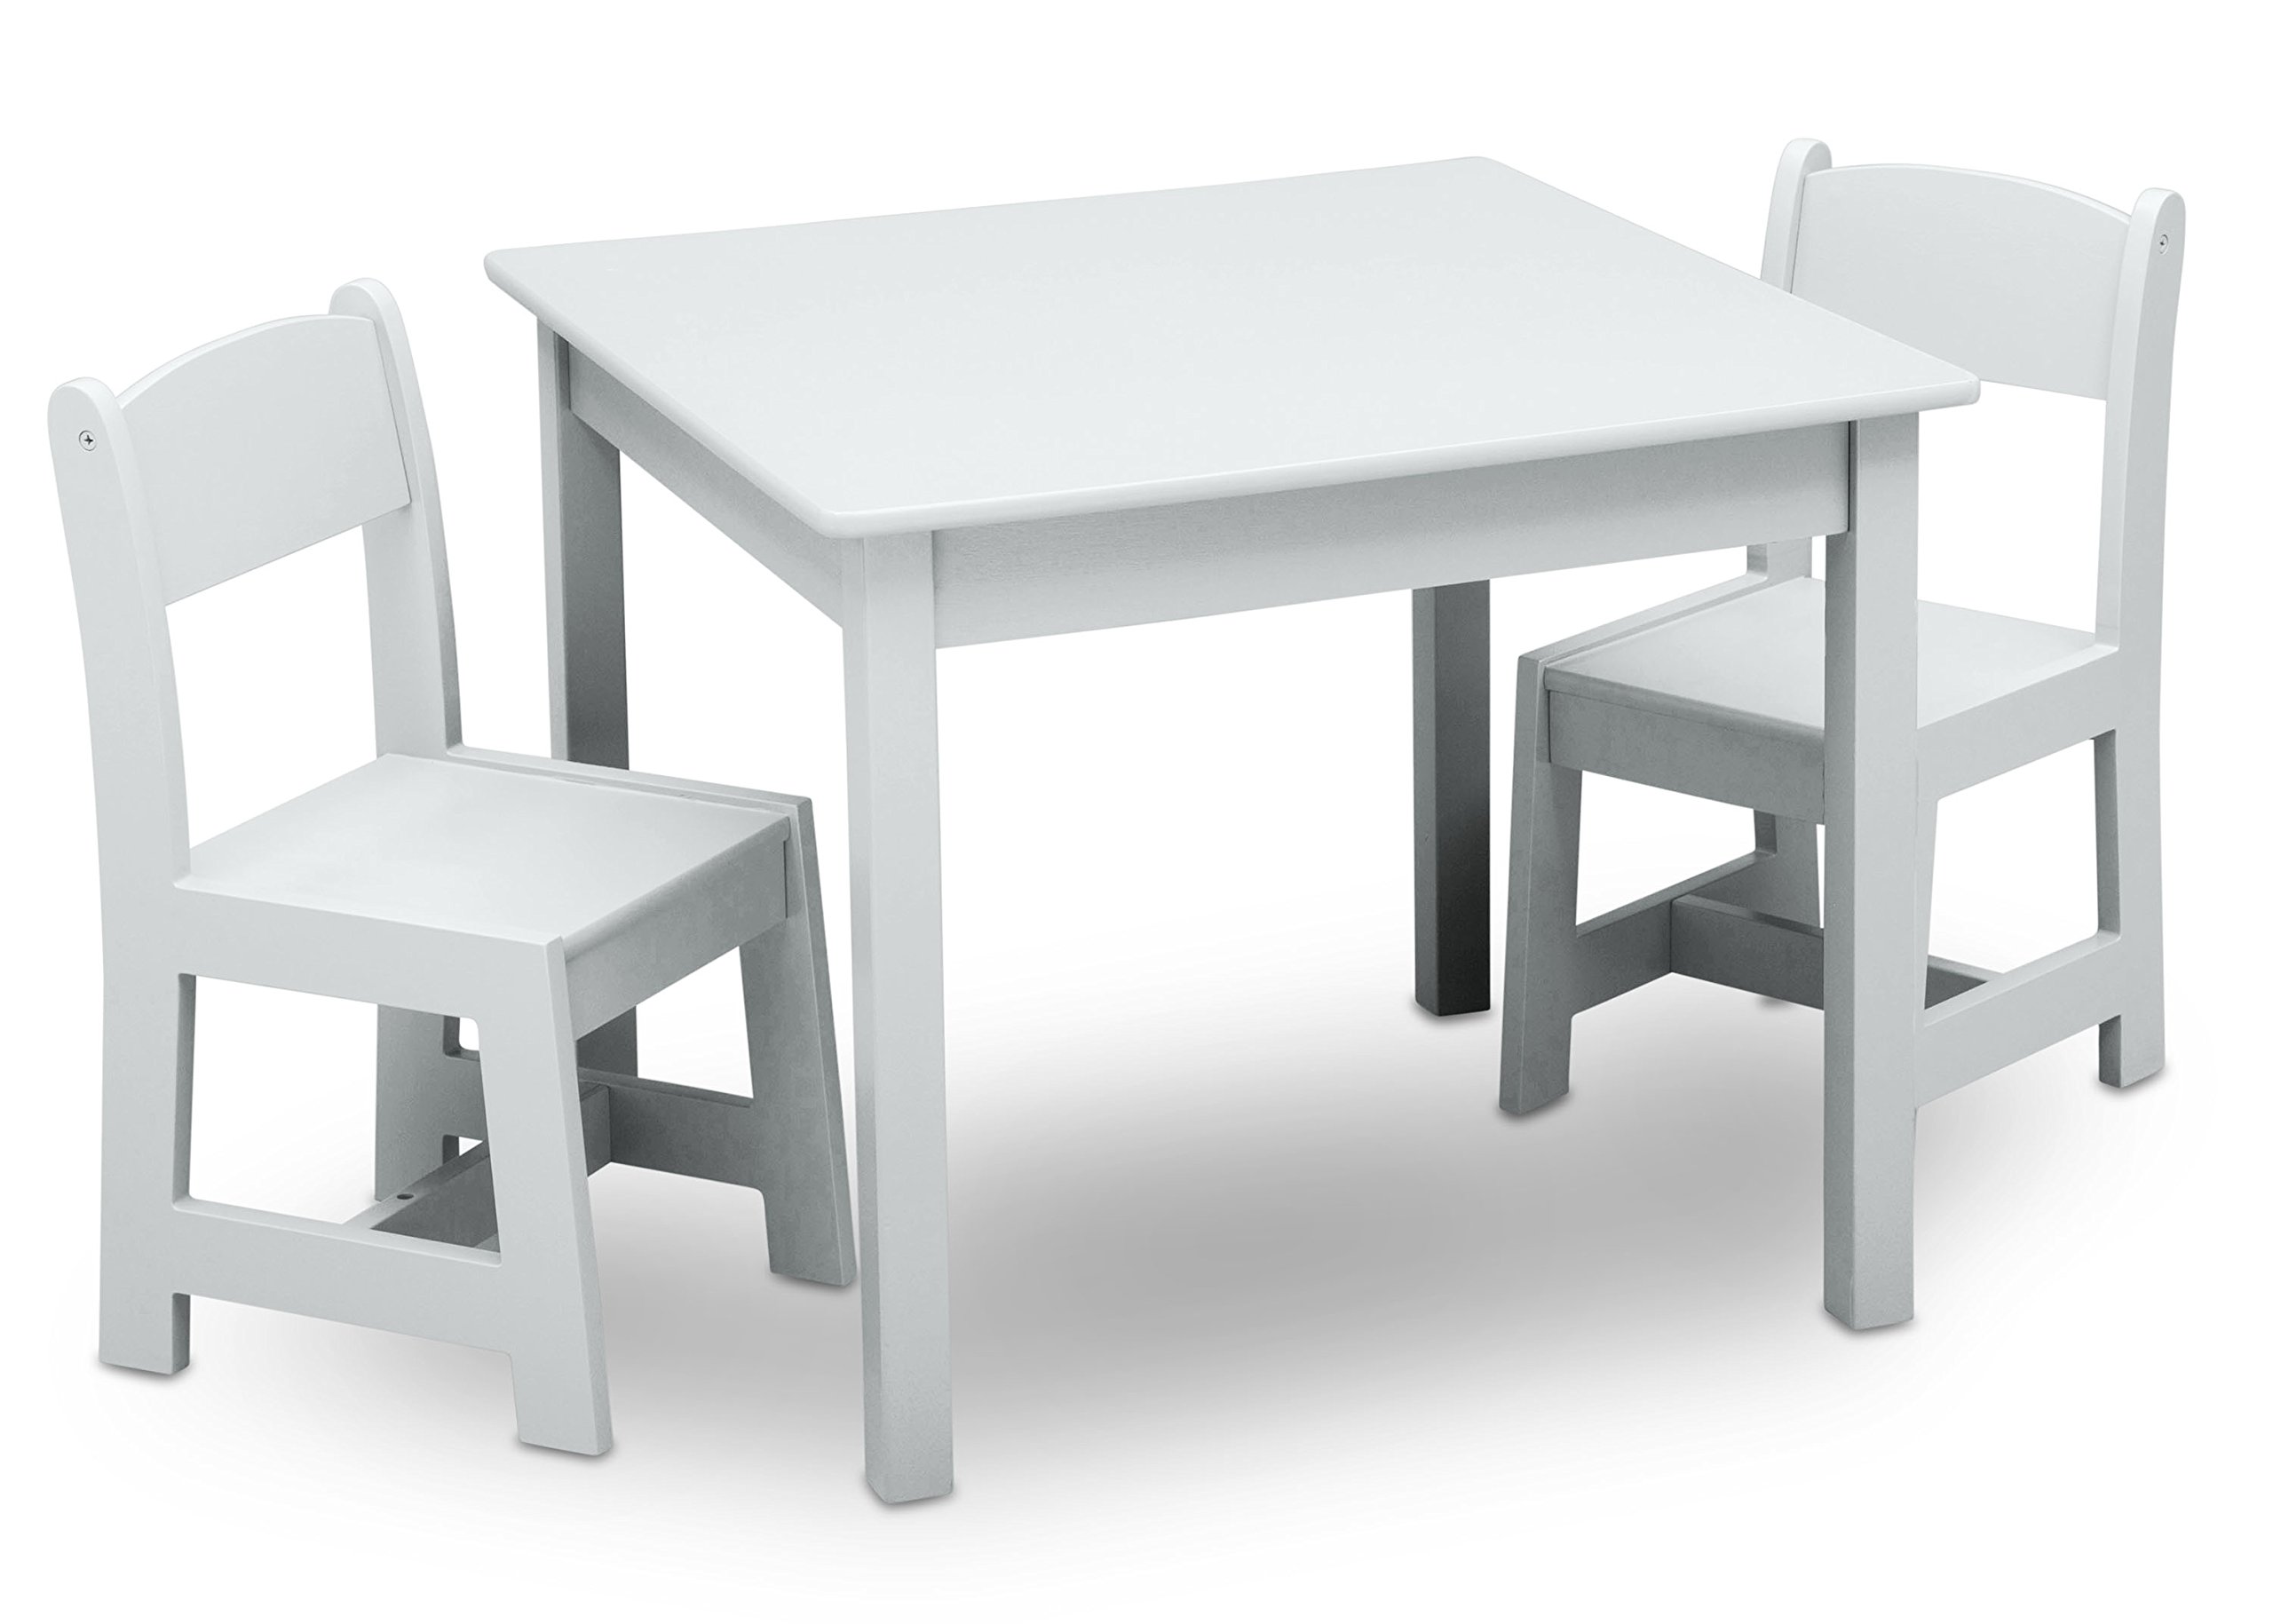 Delta Children MySize Kids Wood Table and Chair Set (2 Chairs Included) - Ideal for Arts & Crafts, Snack Time, & More - Greenguard Gold Certified, Bianca White, 3 Piece Set